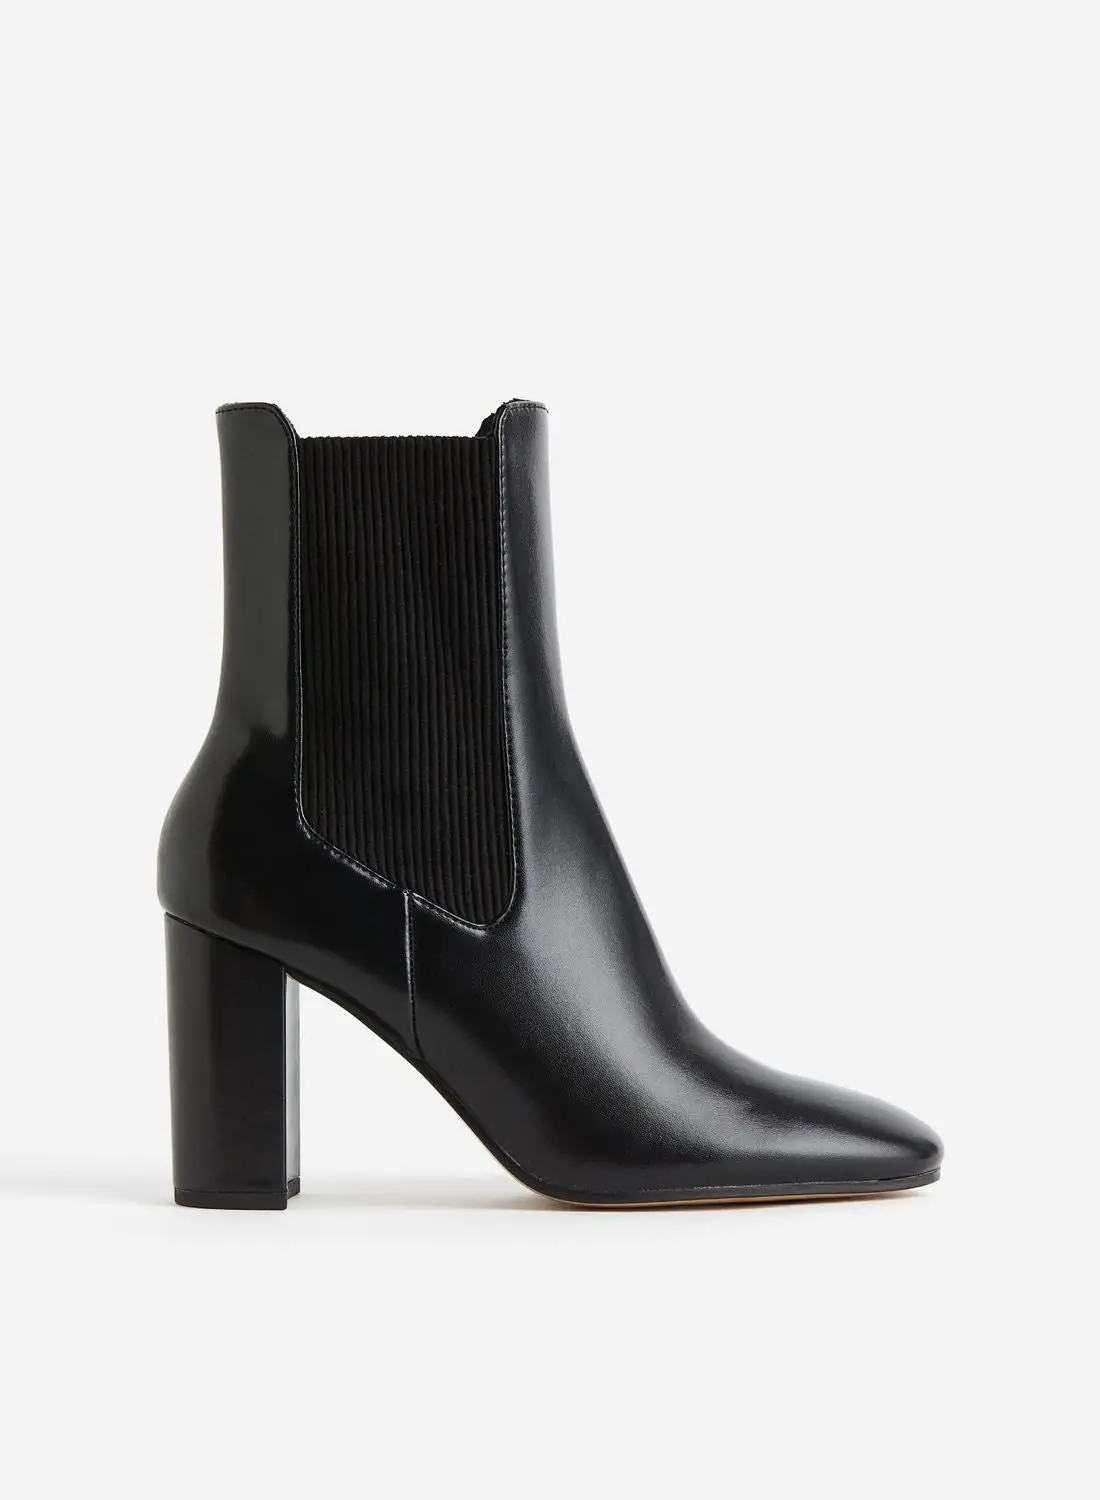 H&M Heeled Chelsea Boots